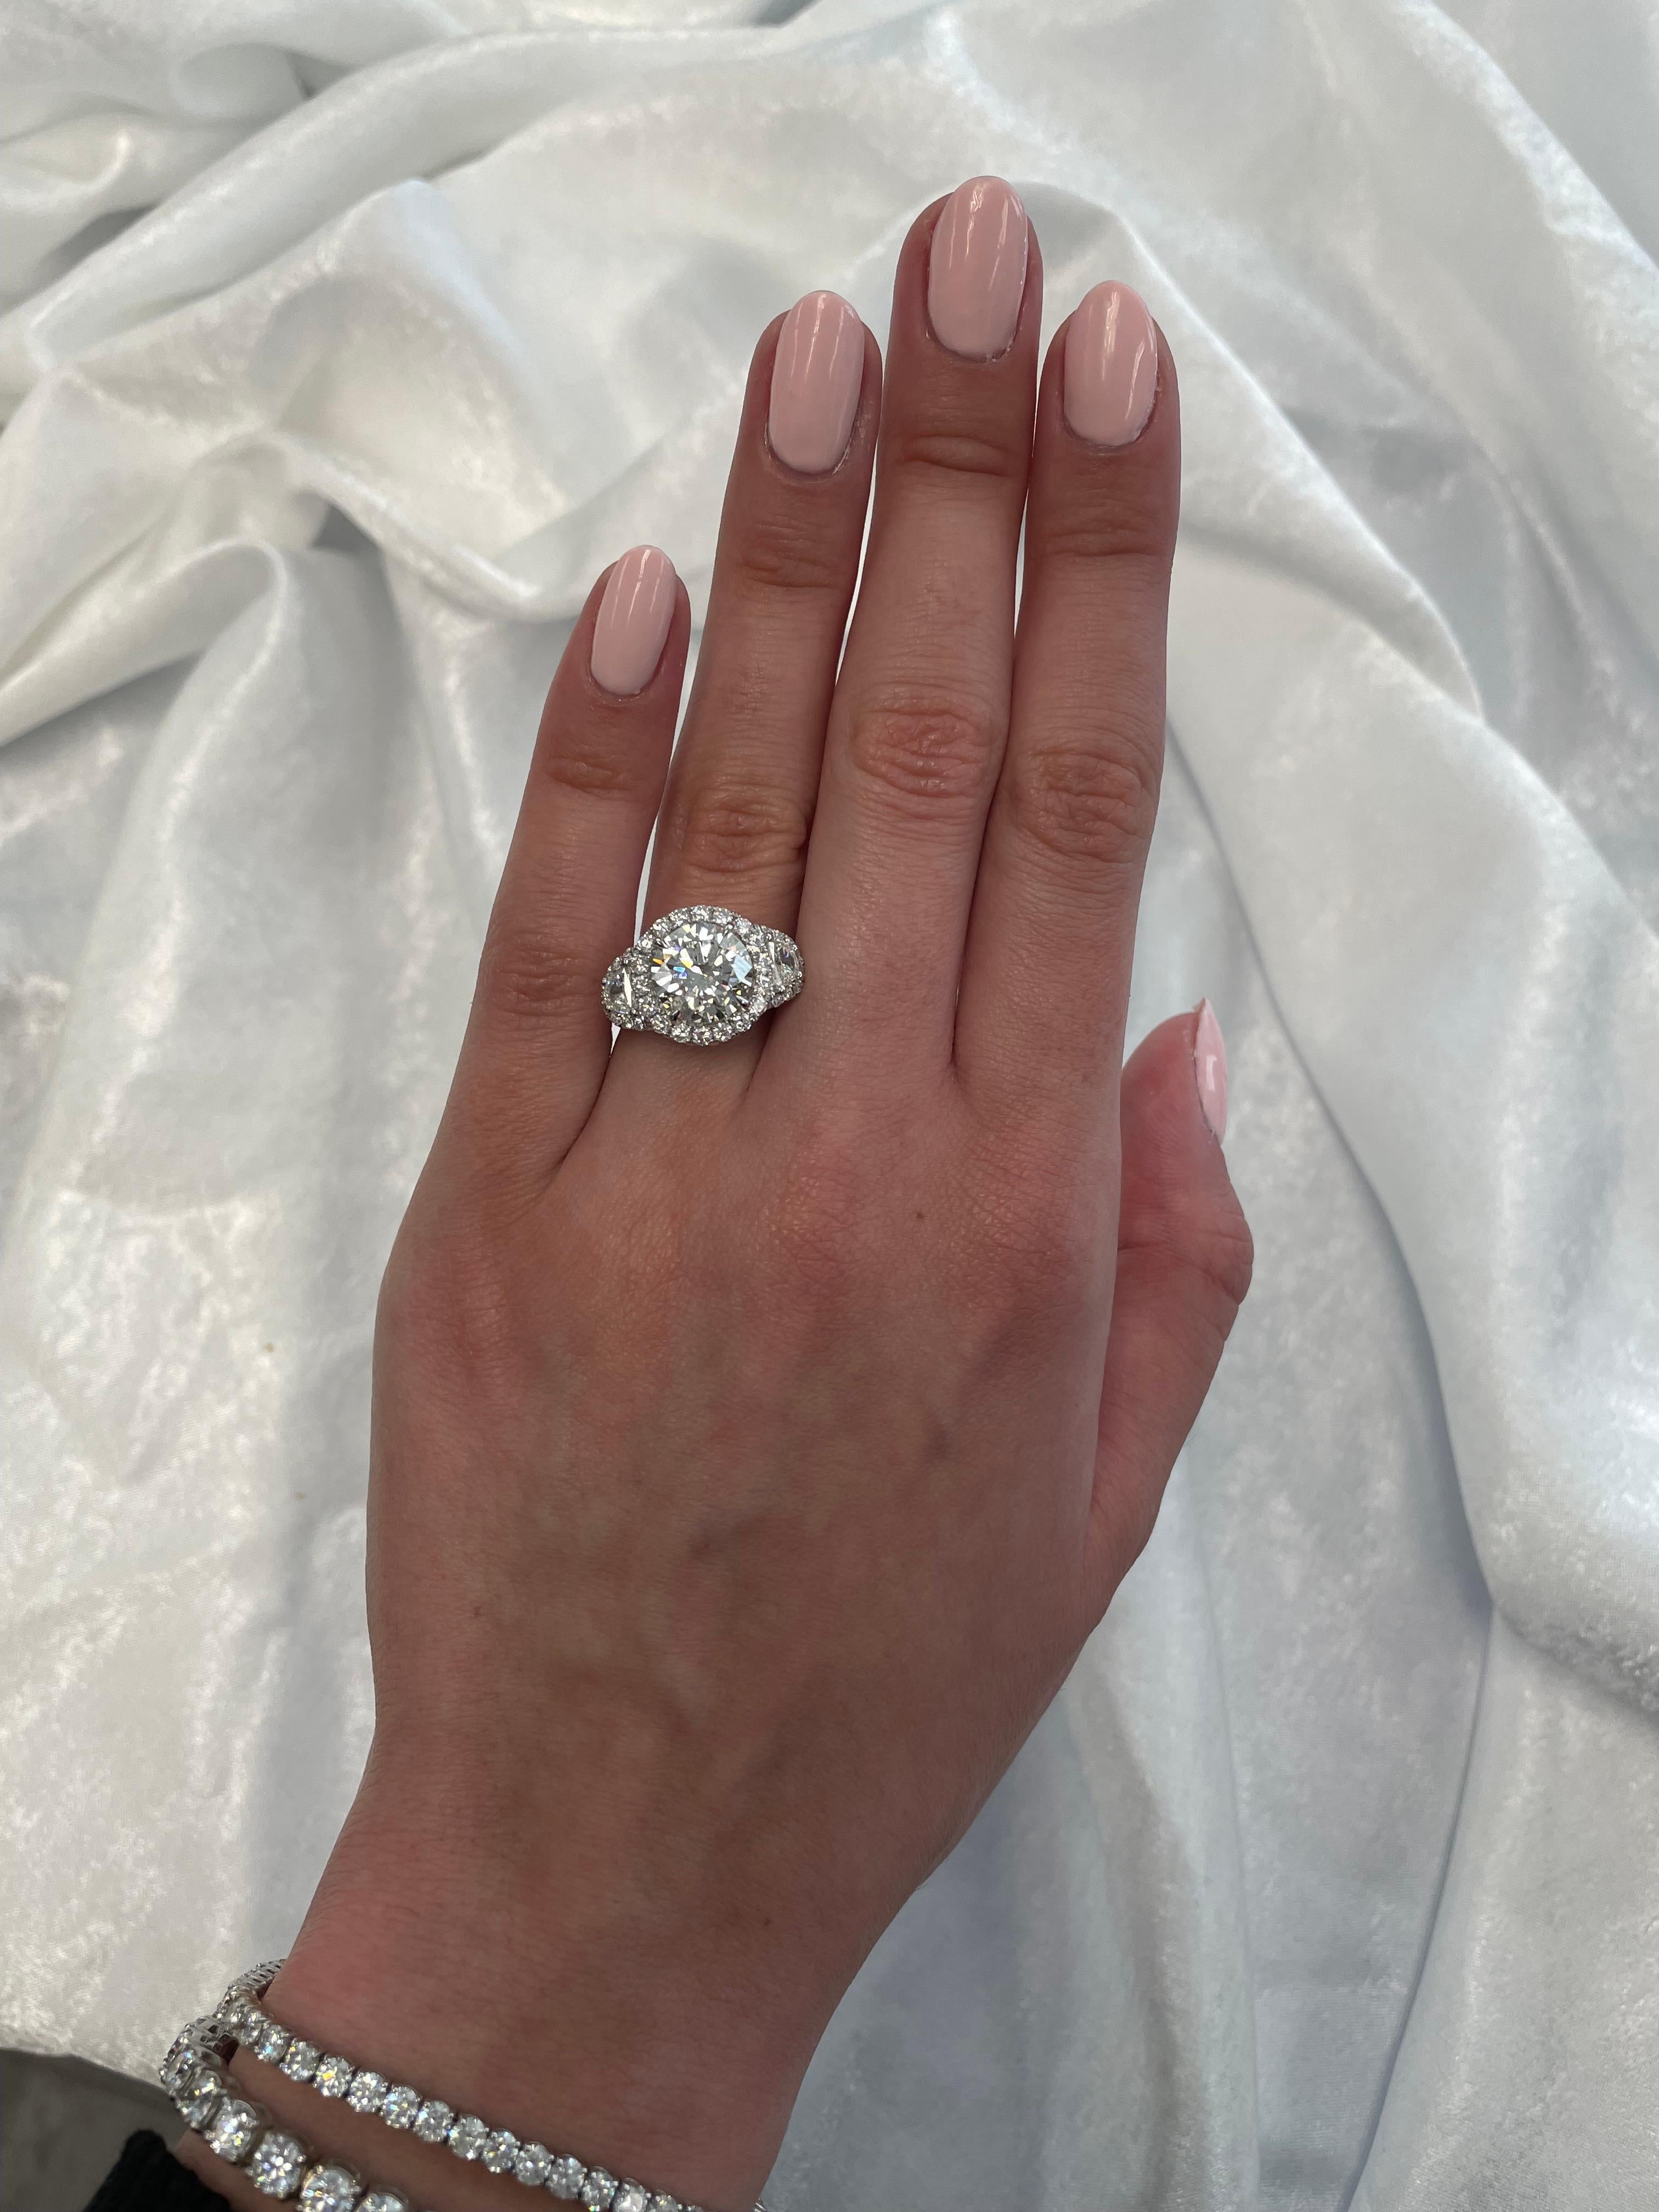 Stunning and classic diamond halo engagement ring, EGL certified. High jewelry by Alexander Beverly Hills.
Center stone, 3.05ct round brilliant cut diamond. I color grade, VS2 clarity grade, EGL certified. Side stones, 2 half mood diamonds, 0.41